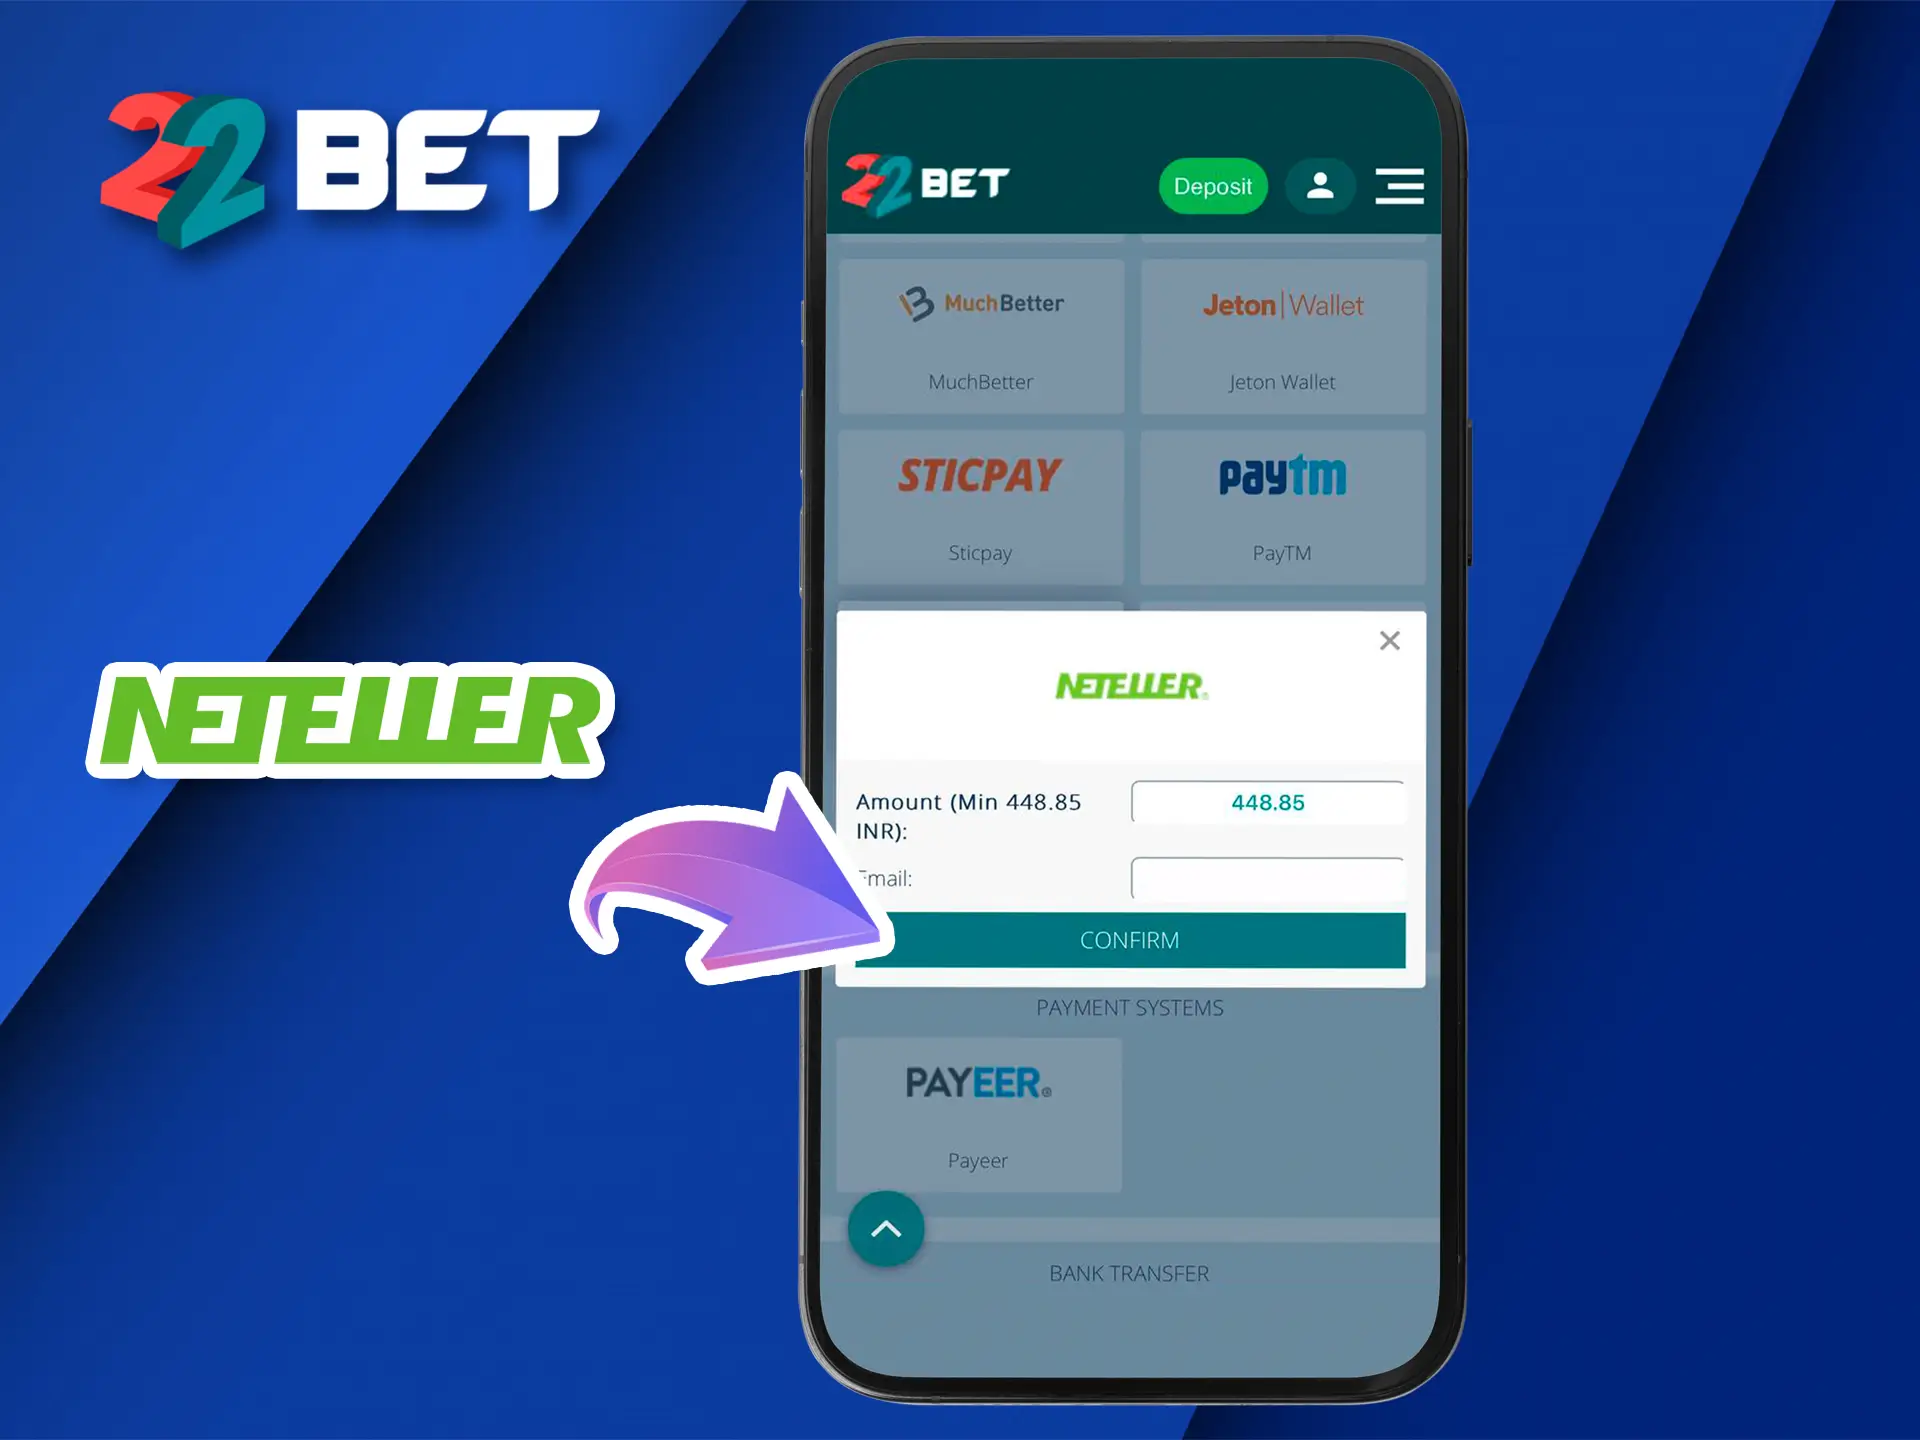 Perform withdrawal of funds from 22Bet and wait for them to be credited to your Neteller wallet.